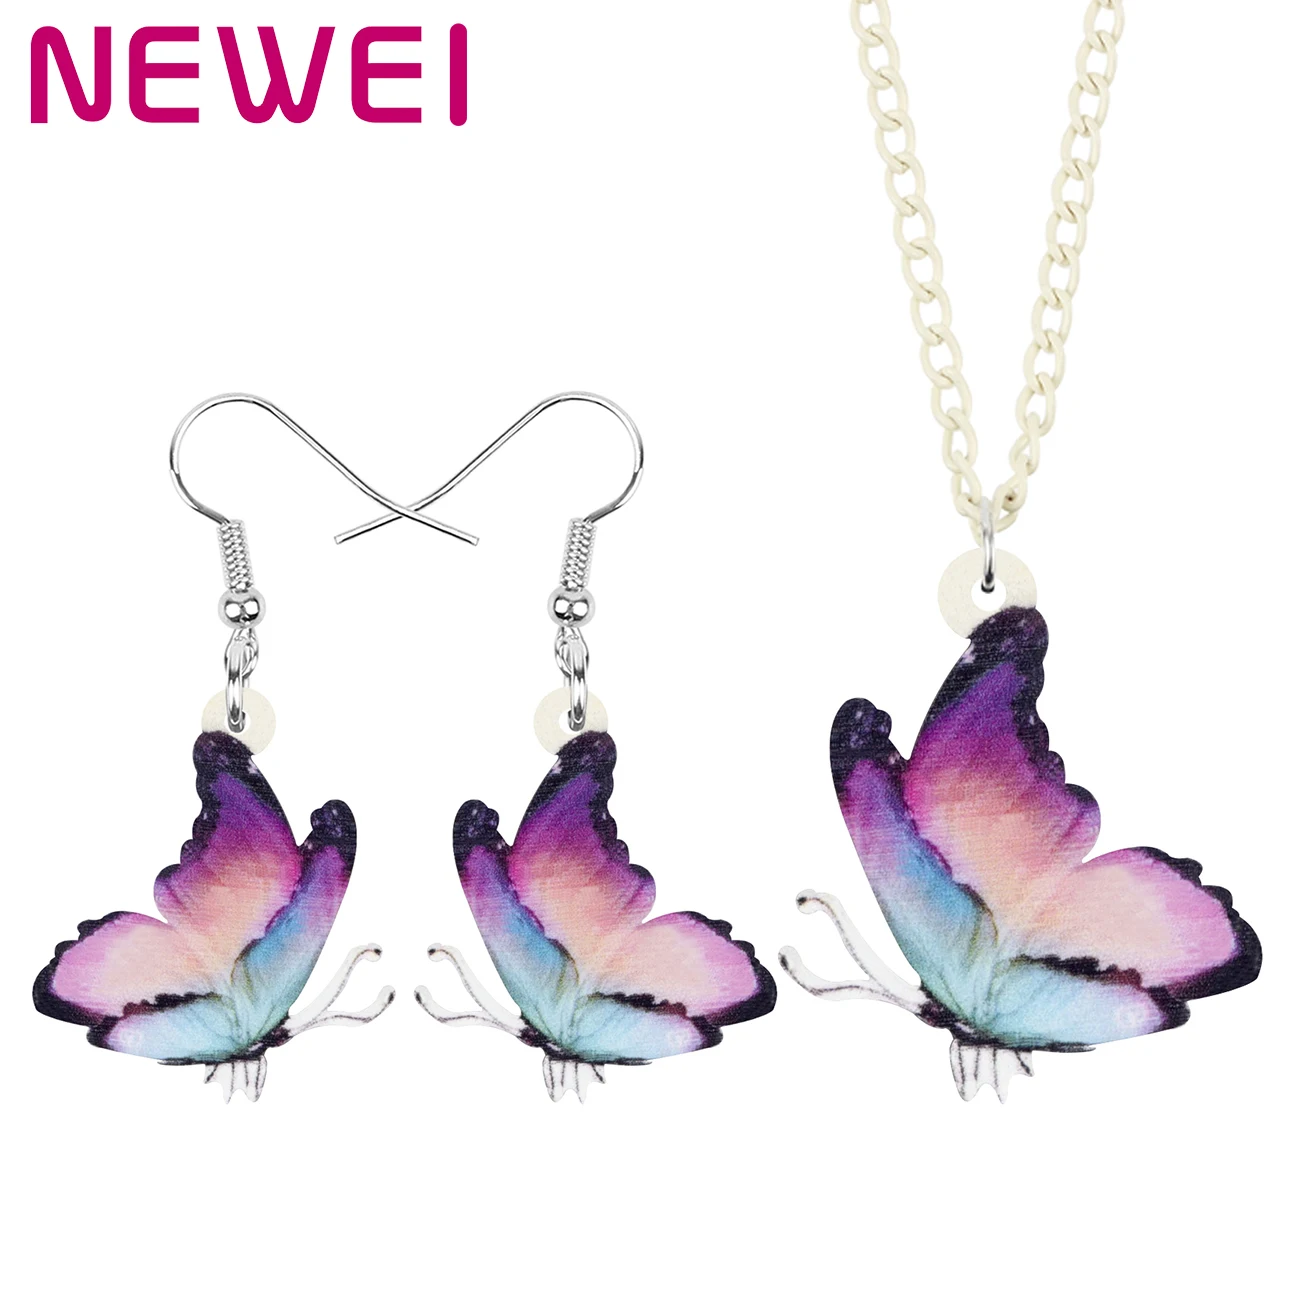 

Newei Acrylic Flying Morpho Butterfly Jewelry Sets Sweet Animal Insect Necklace Earrings For Women Girl Kid Birthday Accessories